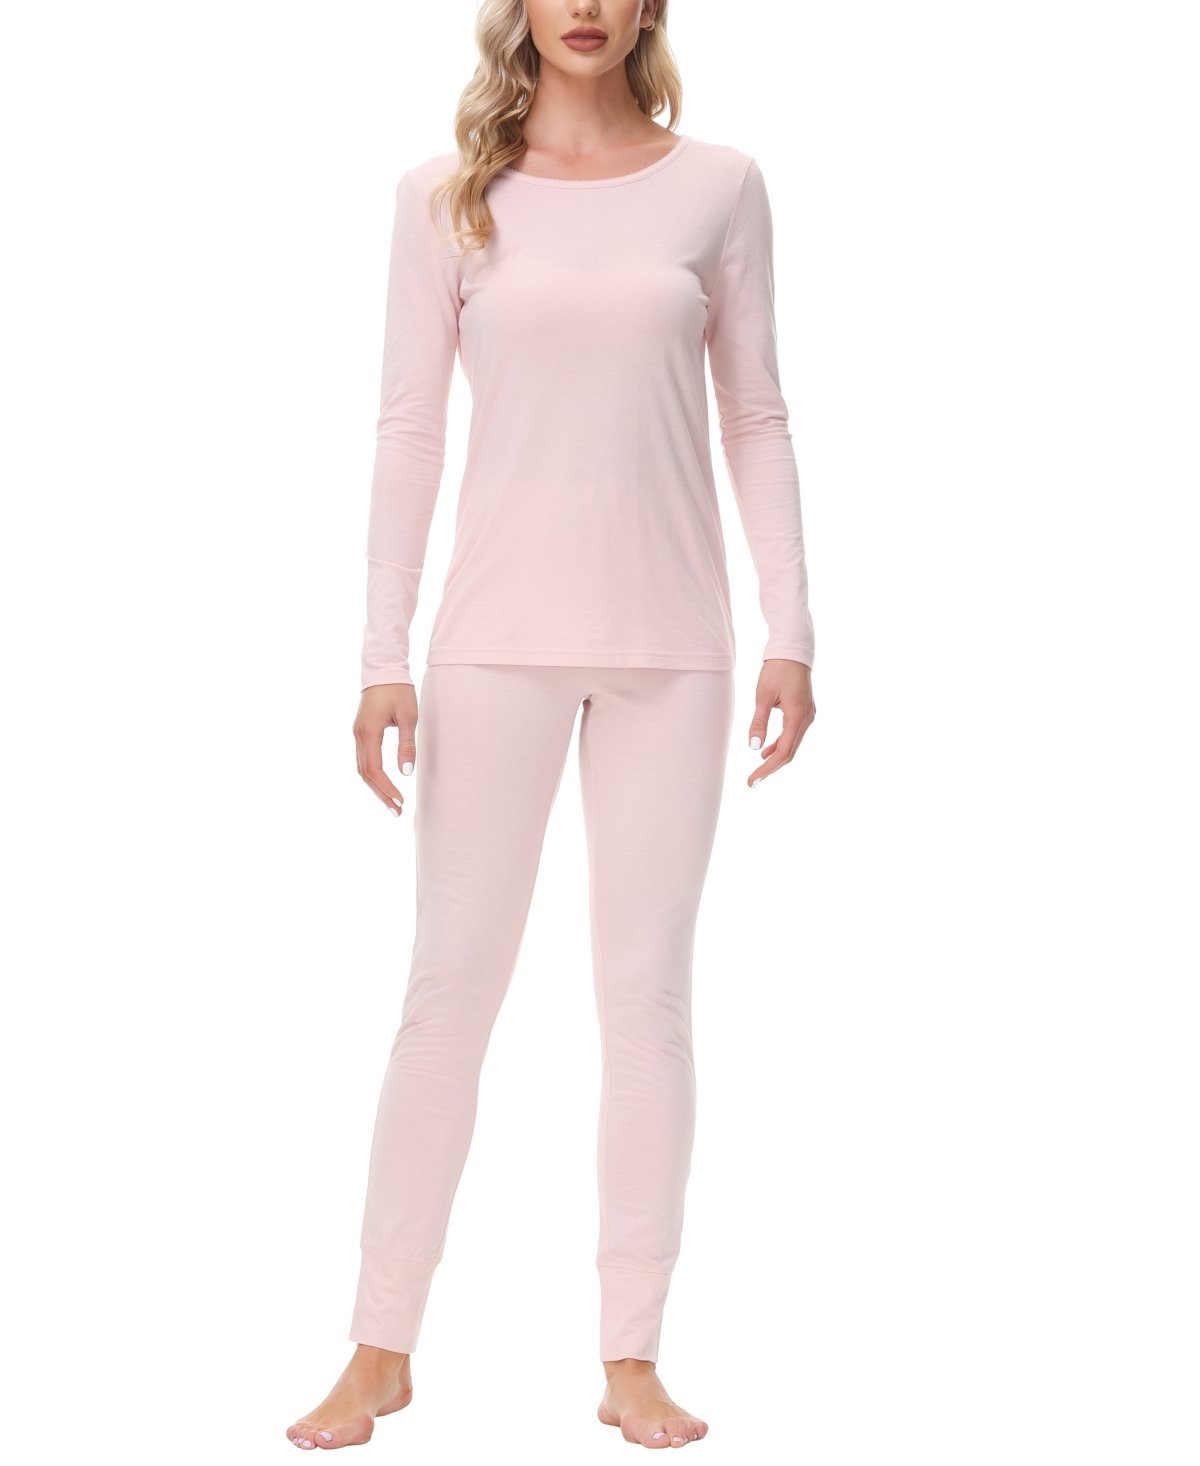 Ink+ivy Women's Knit Long Sleeve Scoop Neck With The Legging Set In Medium Pink